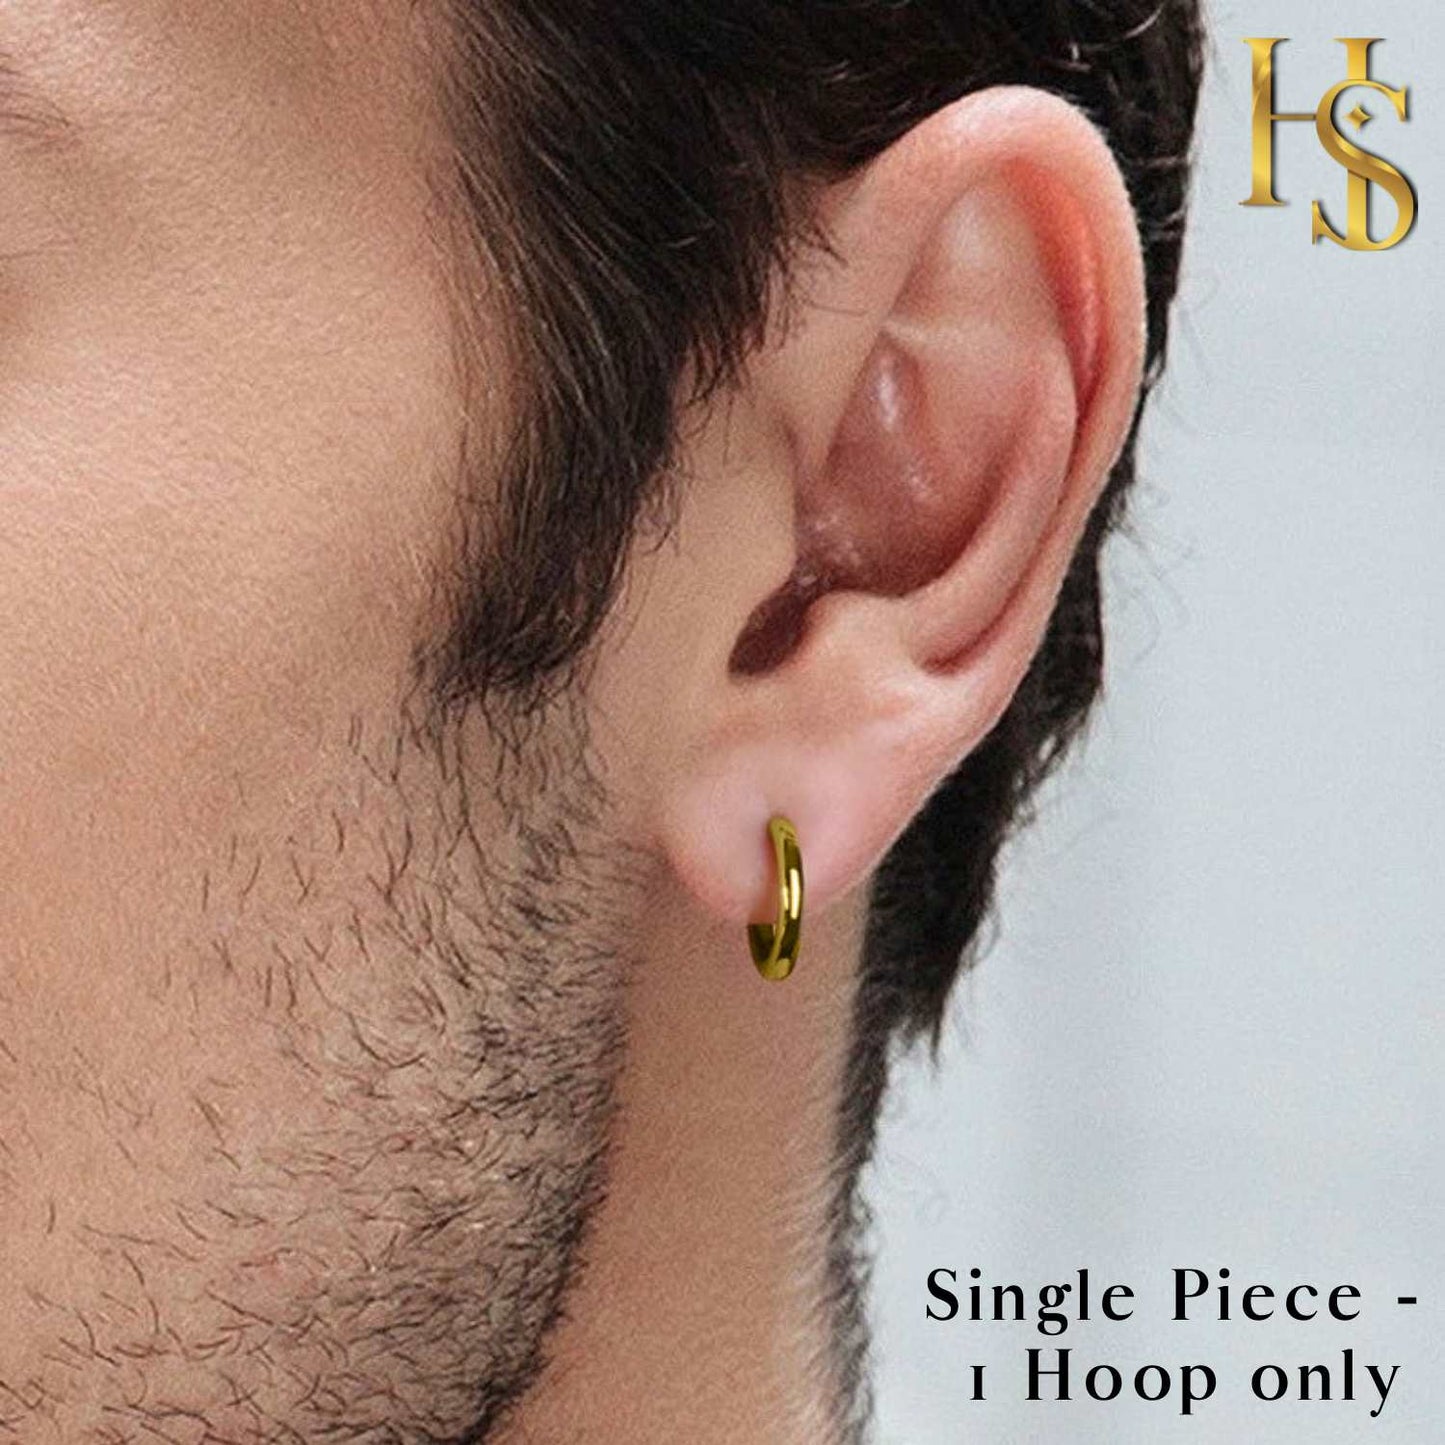 Mens Gold Thick Hoop Earrings in 92.5 Sterling Silver - Round Classic Hoop - Sizes 12mm to 20mm on 18K Gold Finish